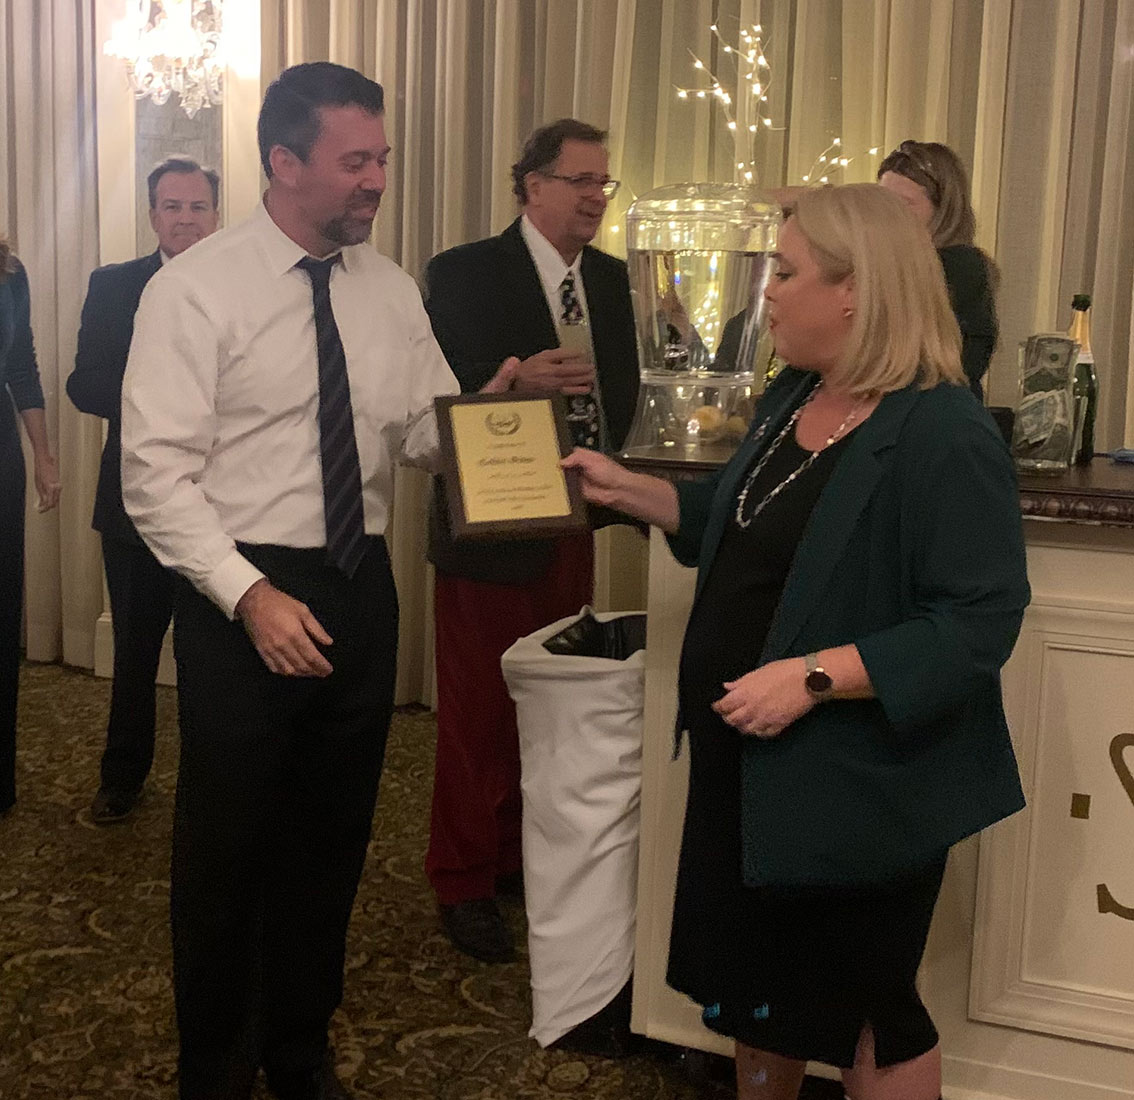 Incoming President Kristen Stanley-Walllace presenting Collin Sims with recognition for his service as 2023 22nd JDC Bar Association President